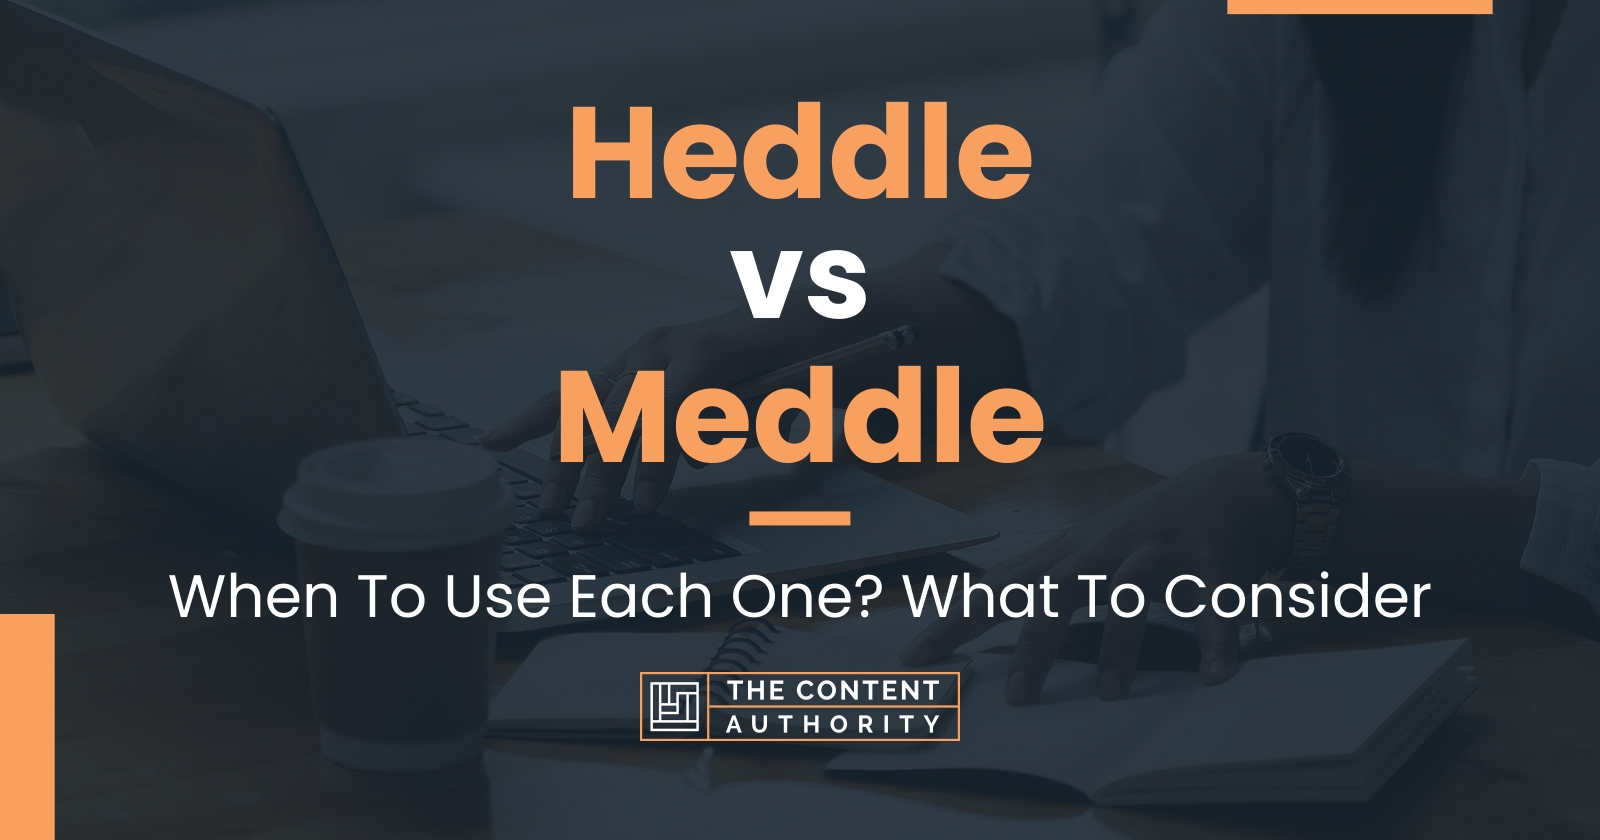 Heddle vs Meddle: When To Use Each One? What To Consider